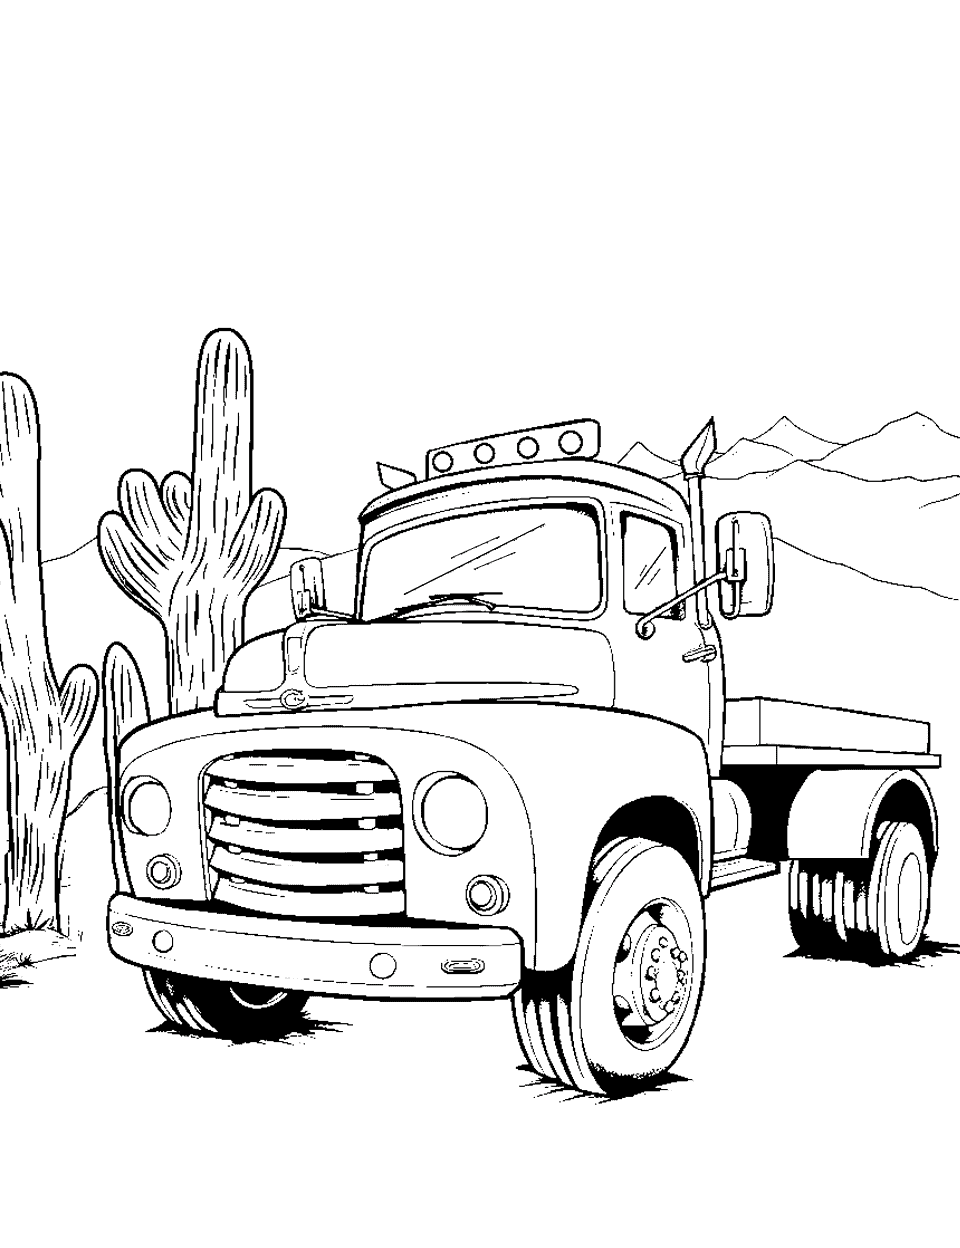 Morning in the Desert Coloring Page - An old truck parked amidst cacti.